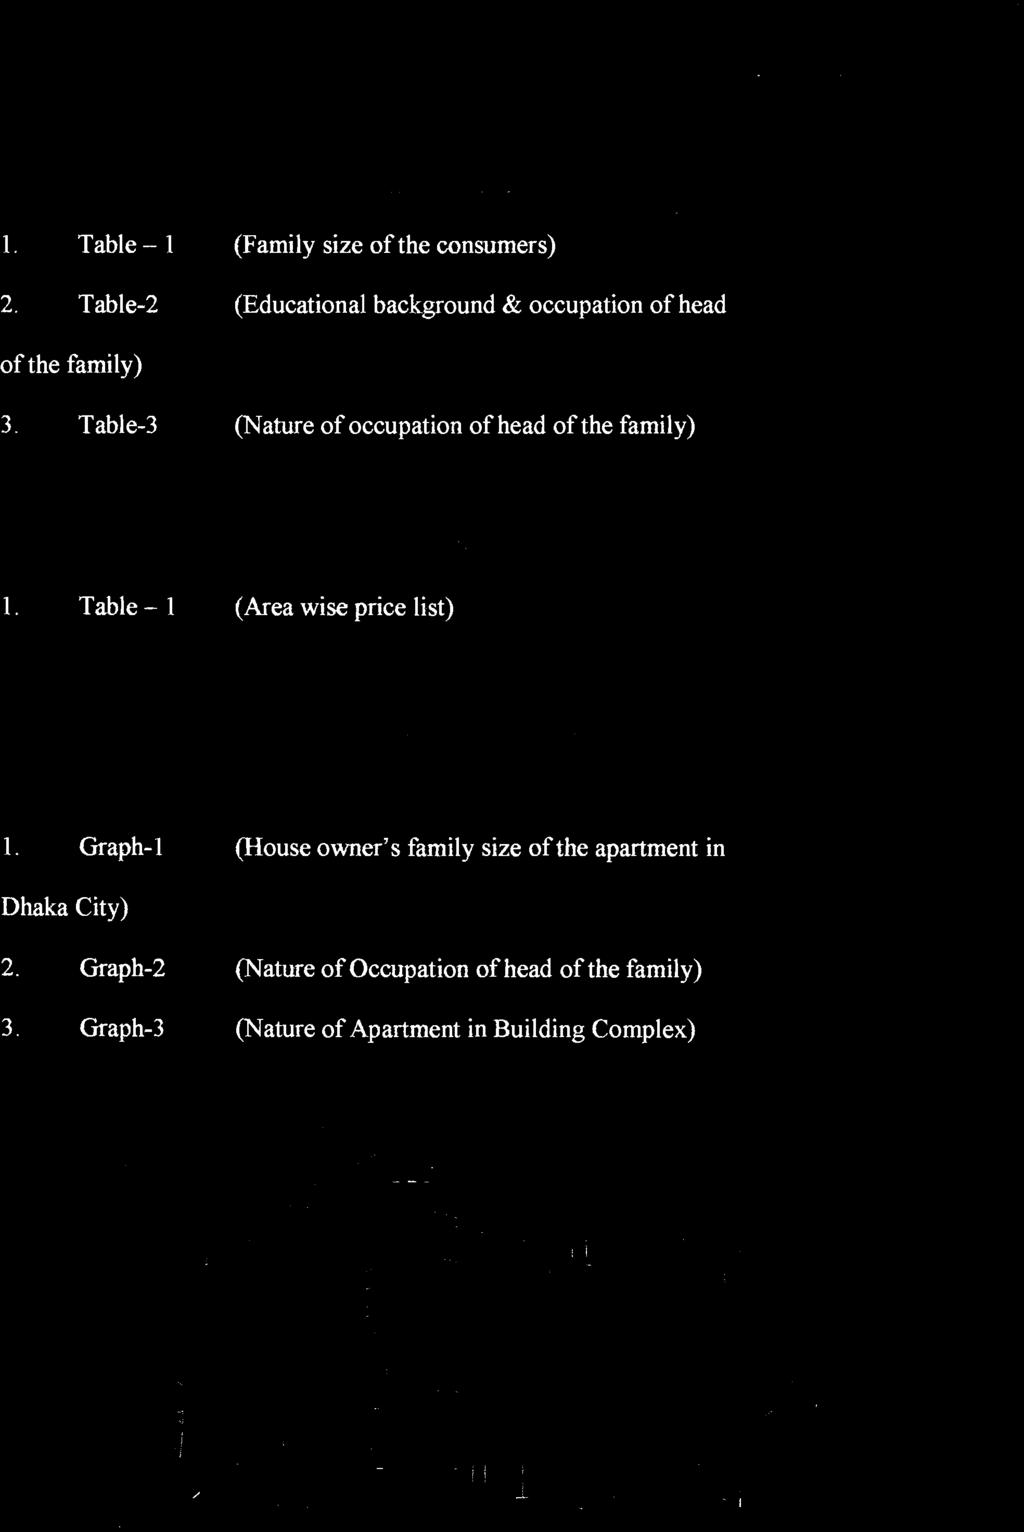 Table-3 (Nature of occupation of head of the family) 1.